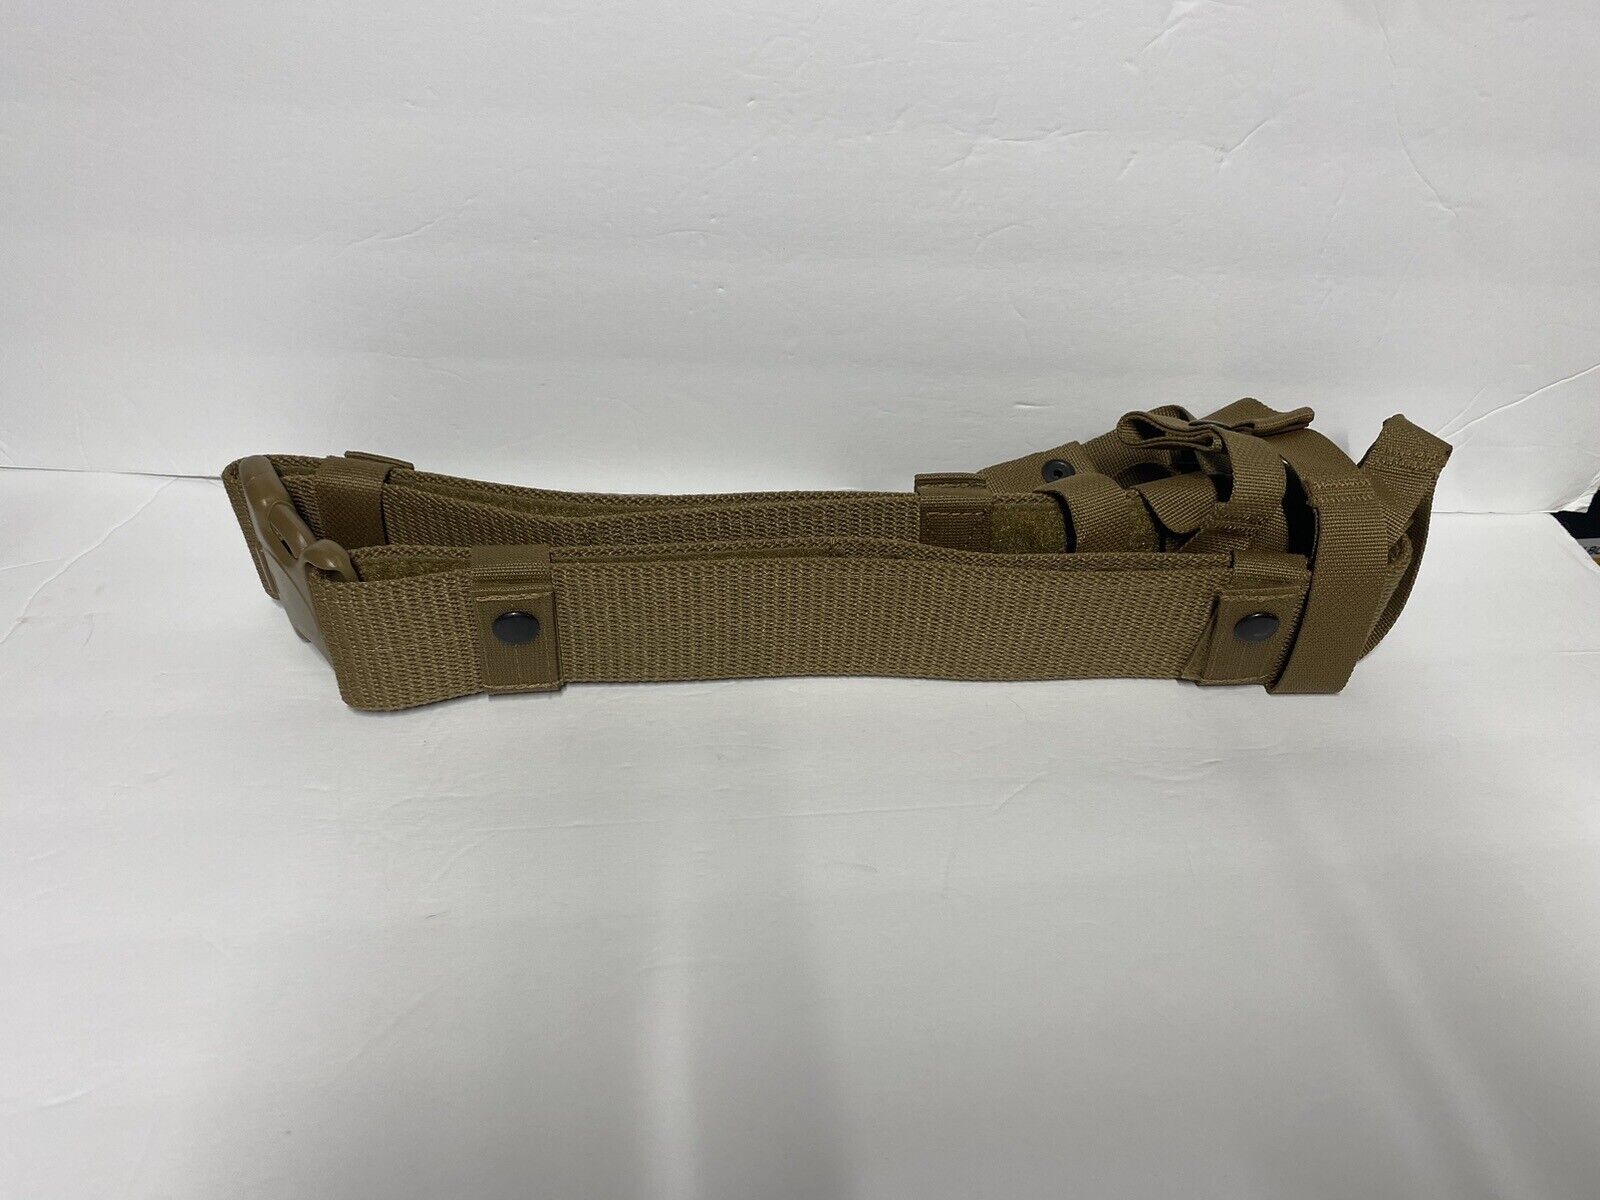 New Spec-Ops Load Bearing Battle Belt IBA Attachment Military Coyote Tan Police